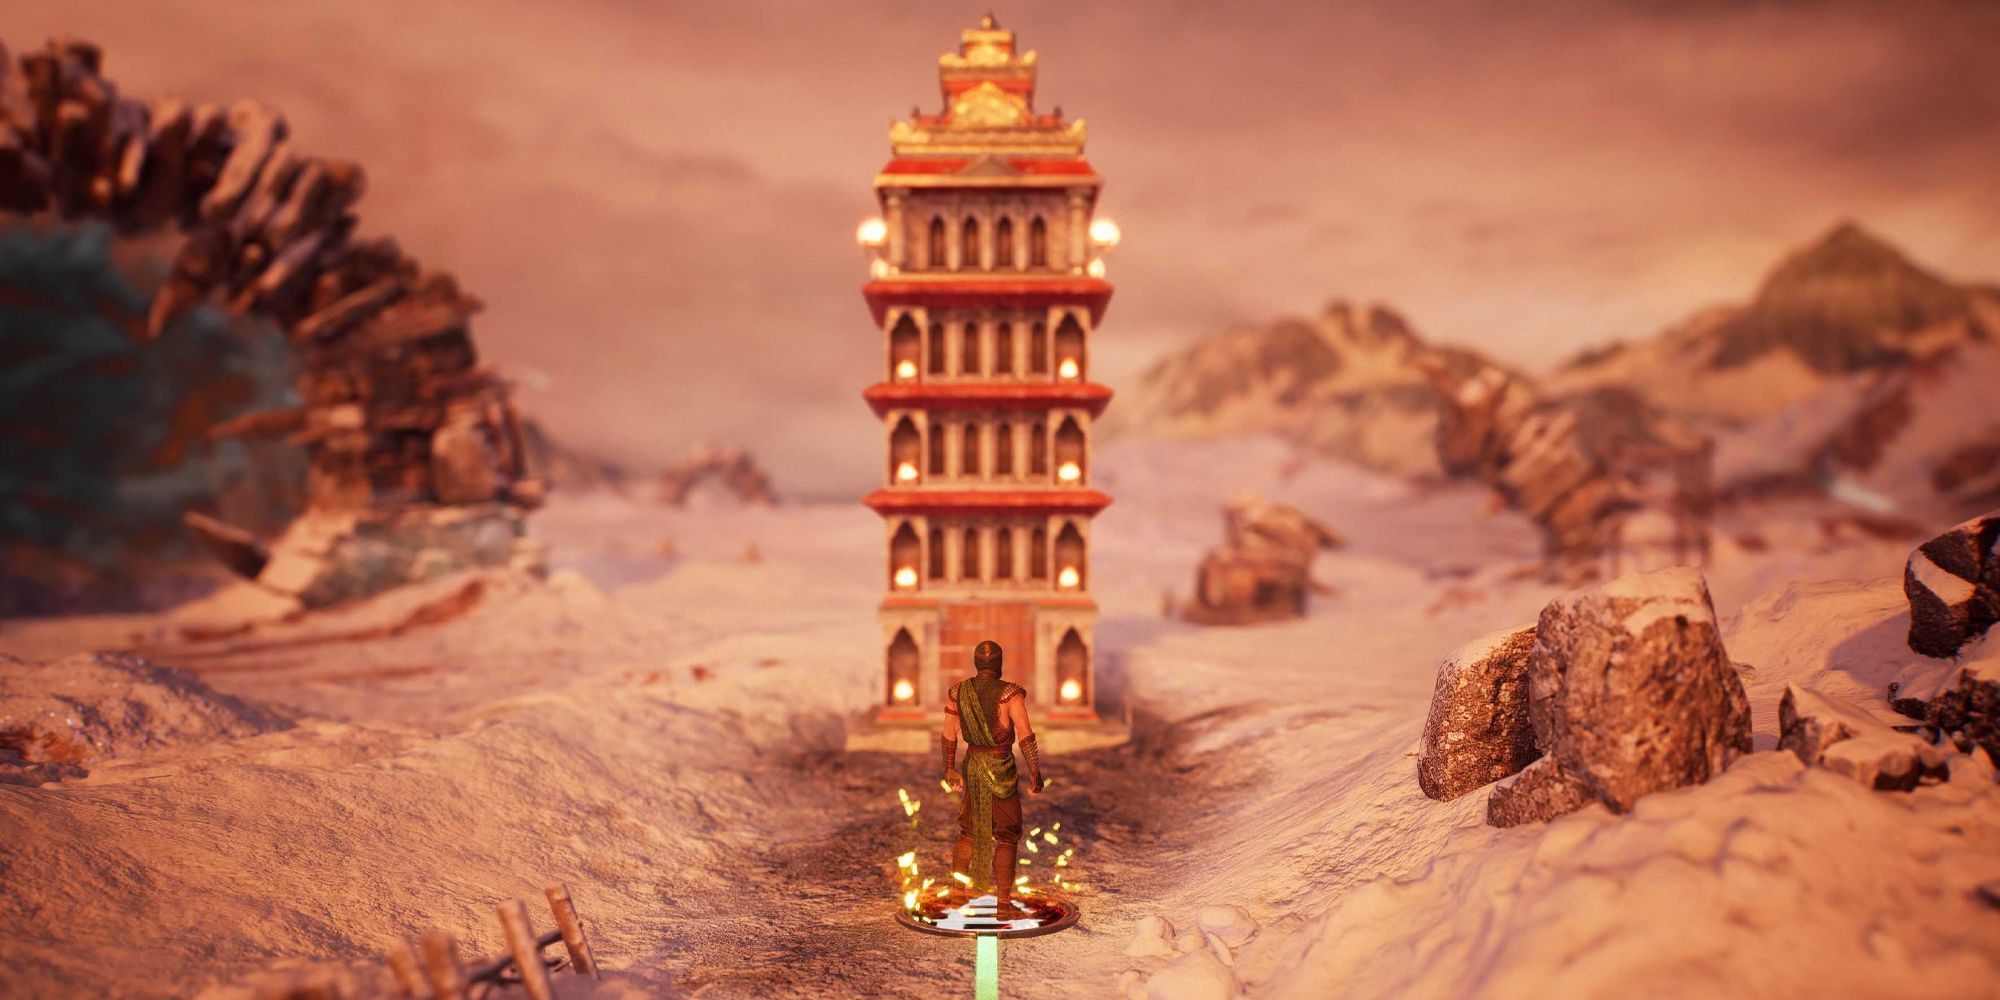 Mortal Kombat 1 Reptile in Invasions mode looking at a tower